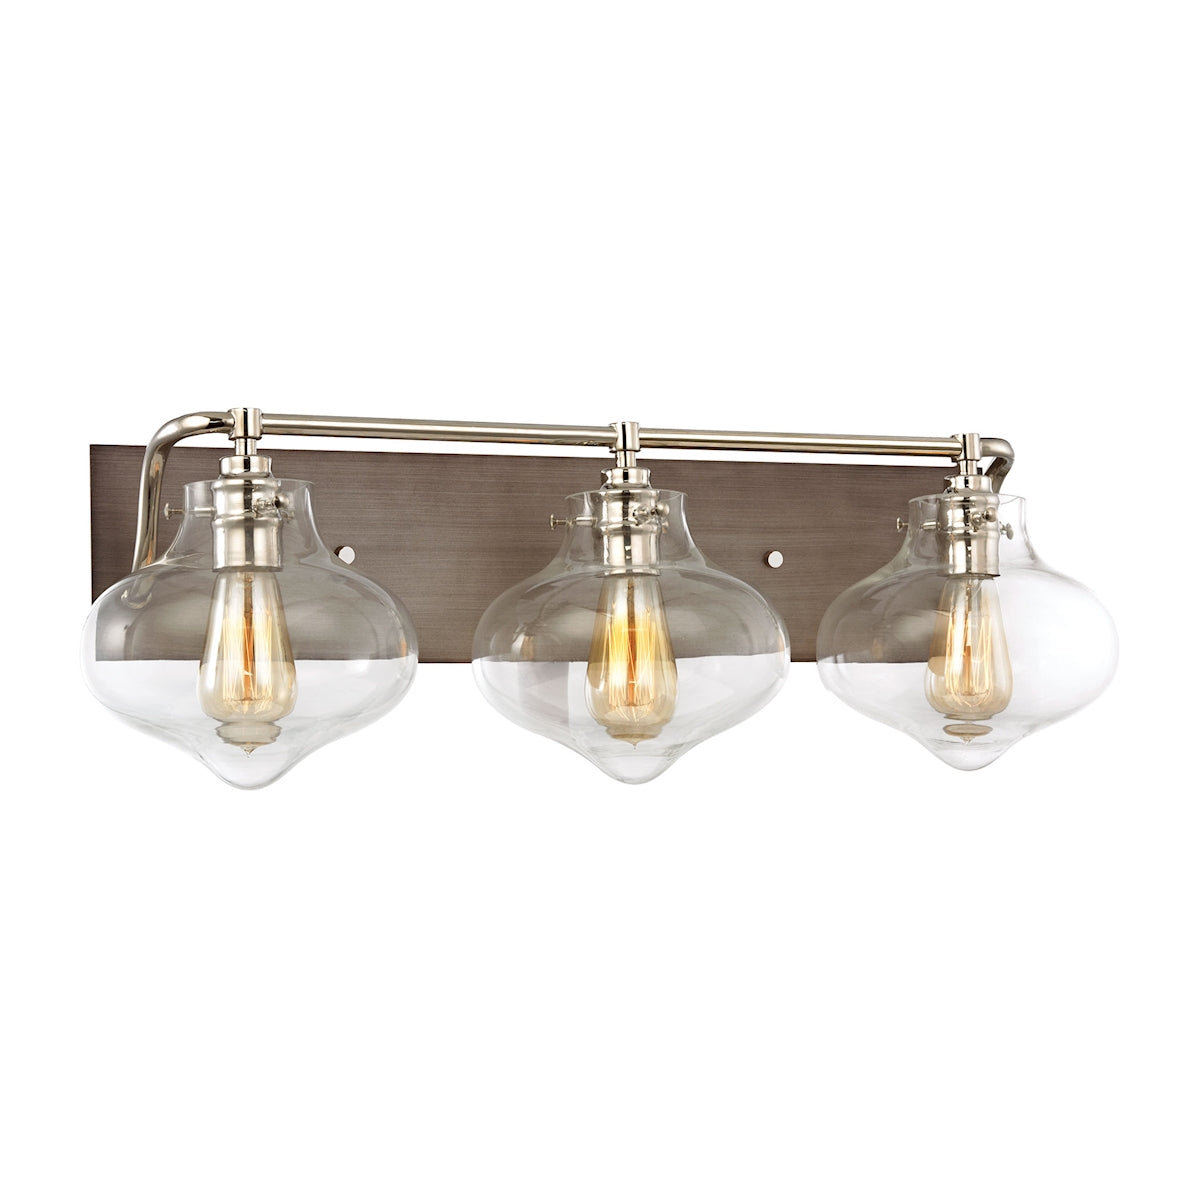 ELK Lighting 31942/3 Kelsey 3-Light Vanity Sconce in Polished Nickel and Weathered Zinc with Clear Glass